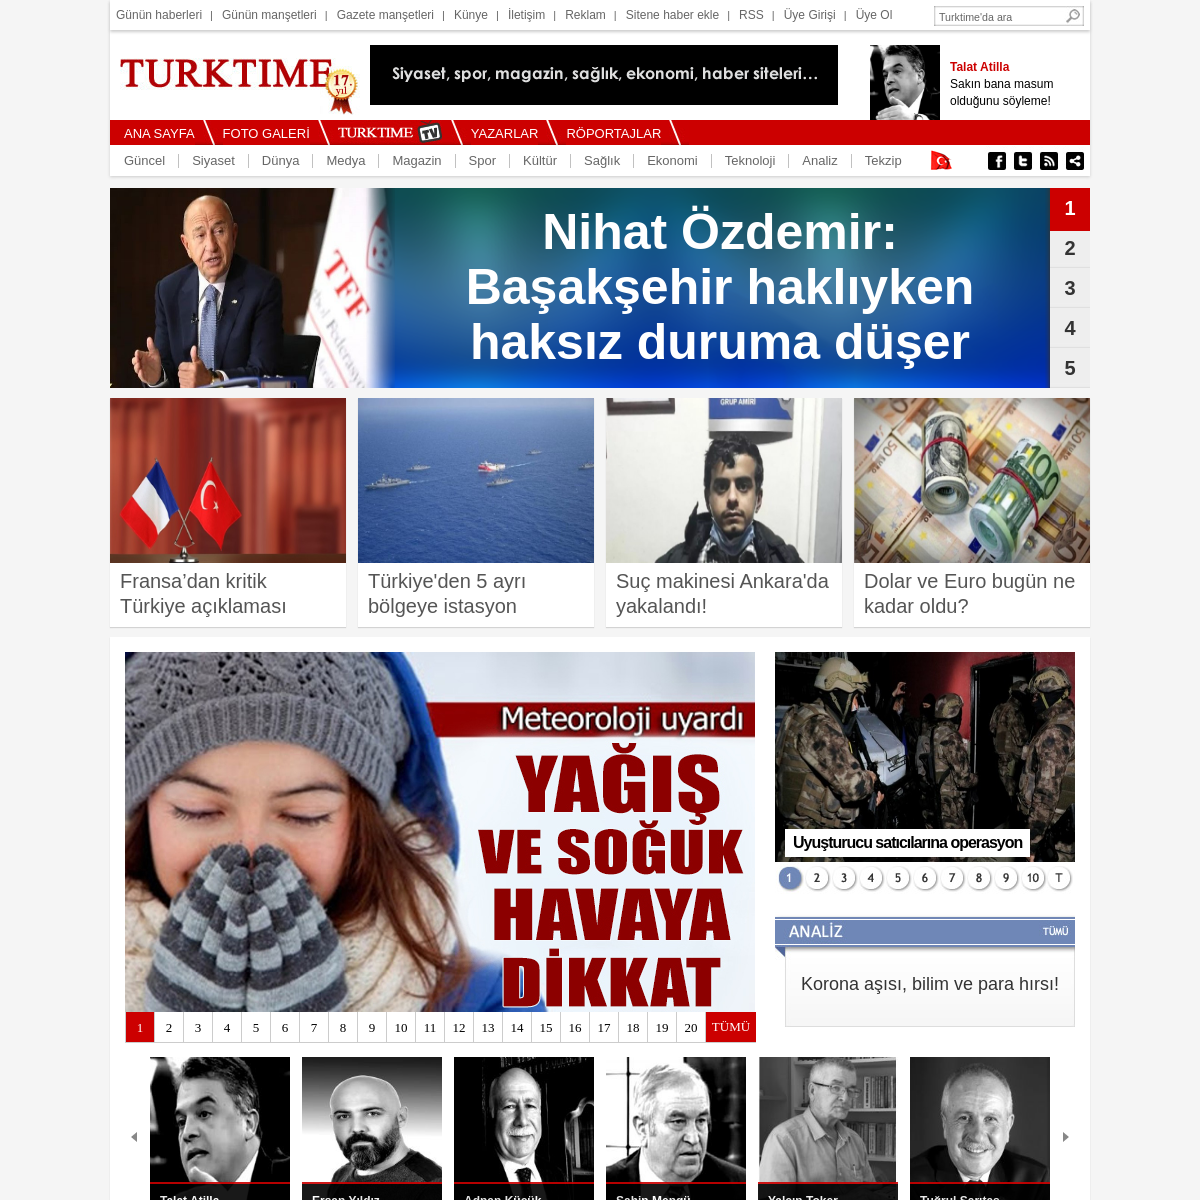 A complete backup of turktime.com